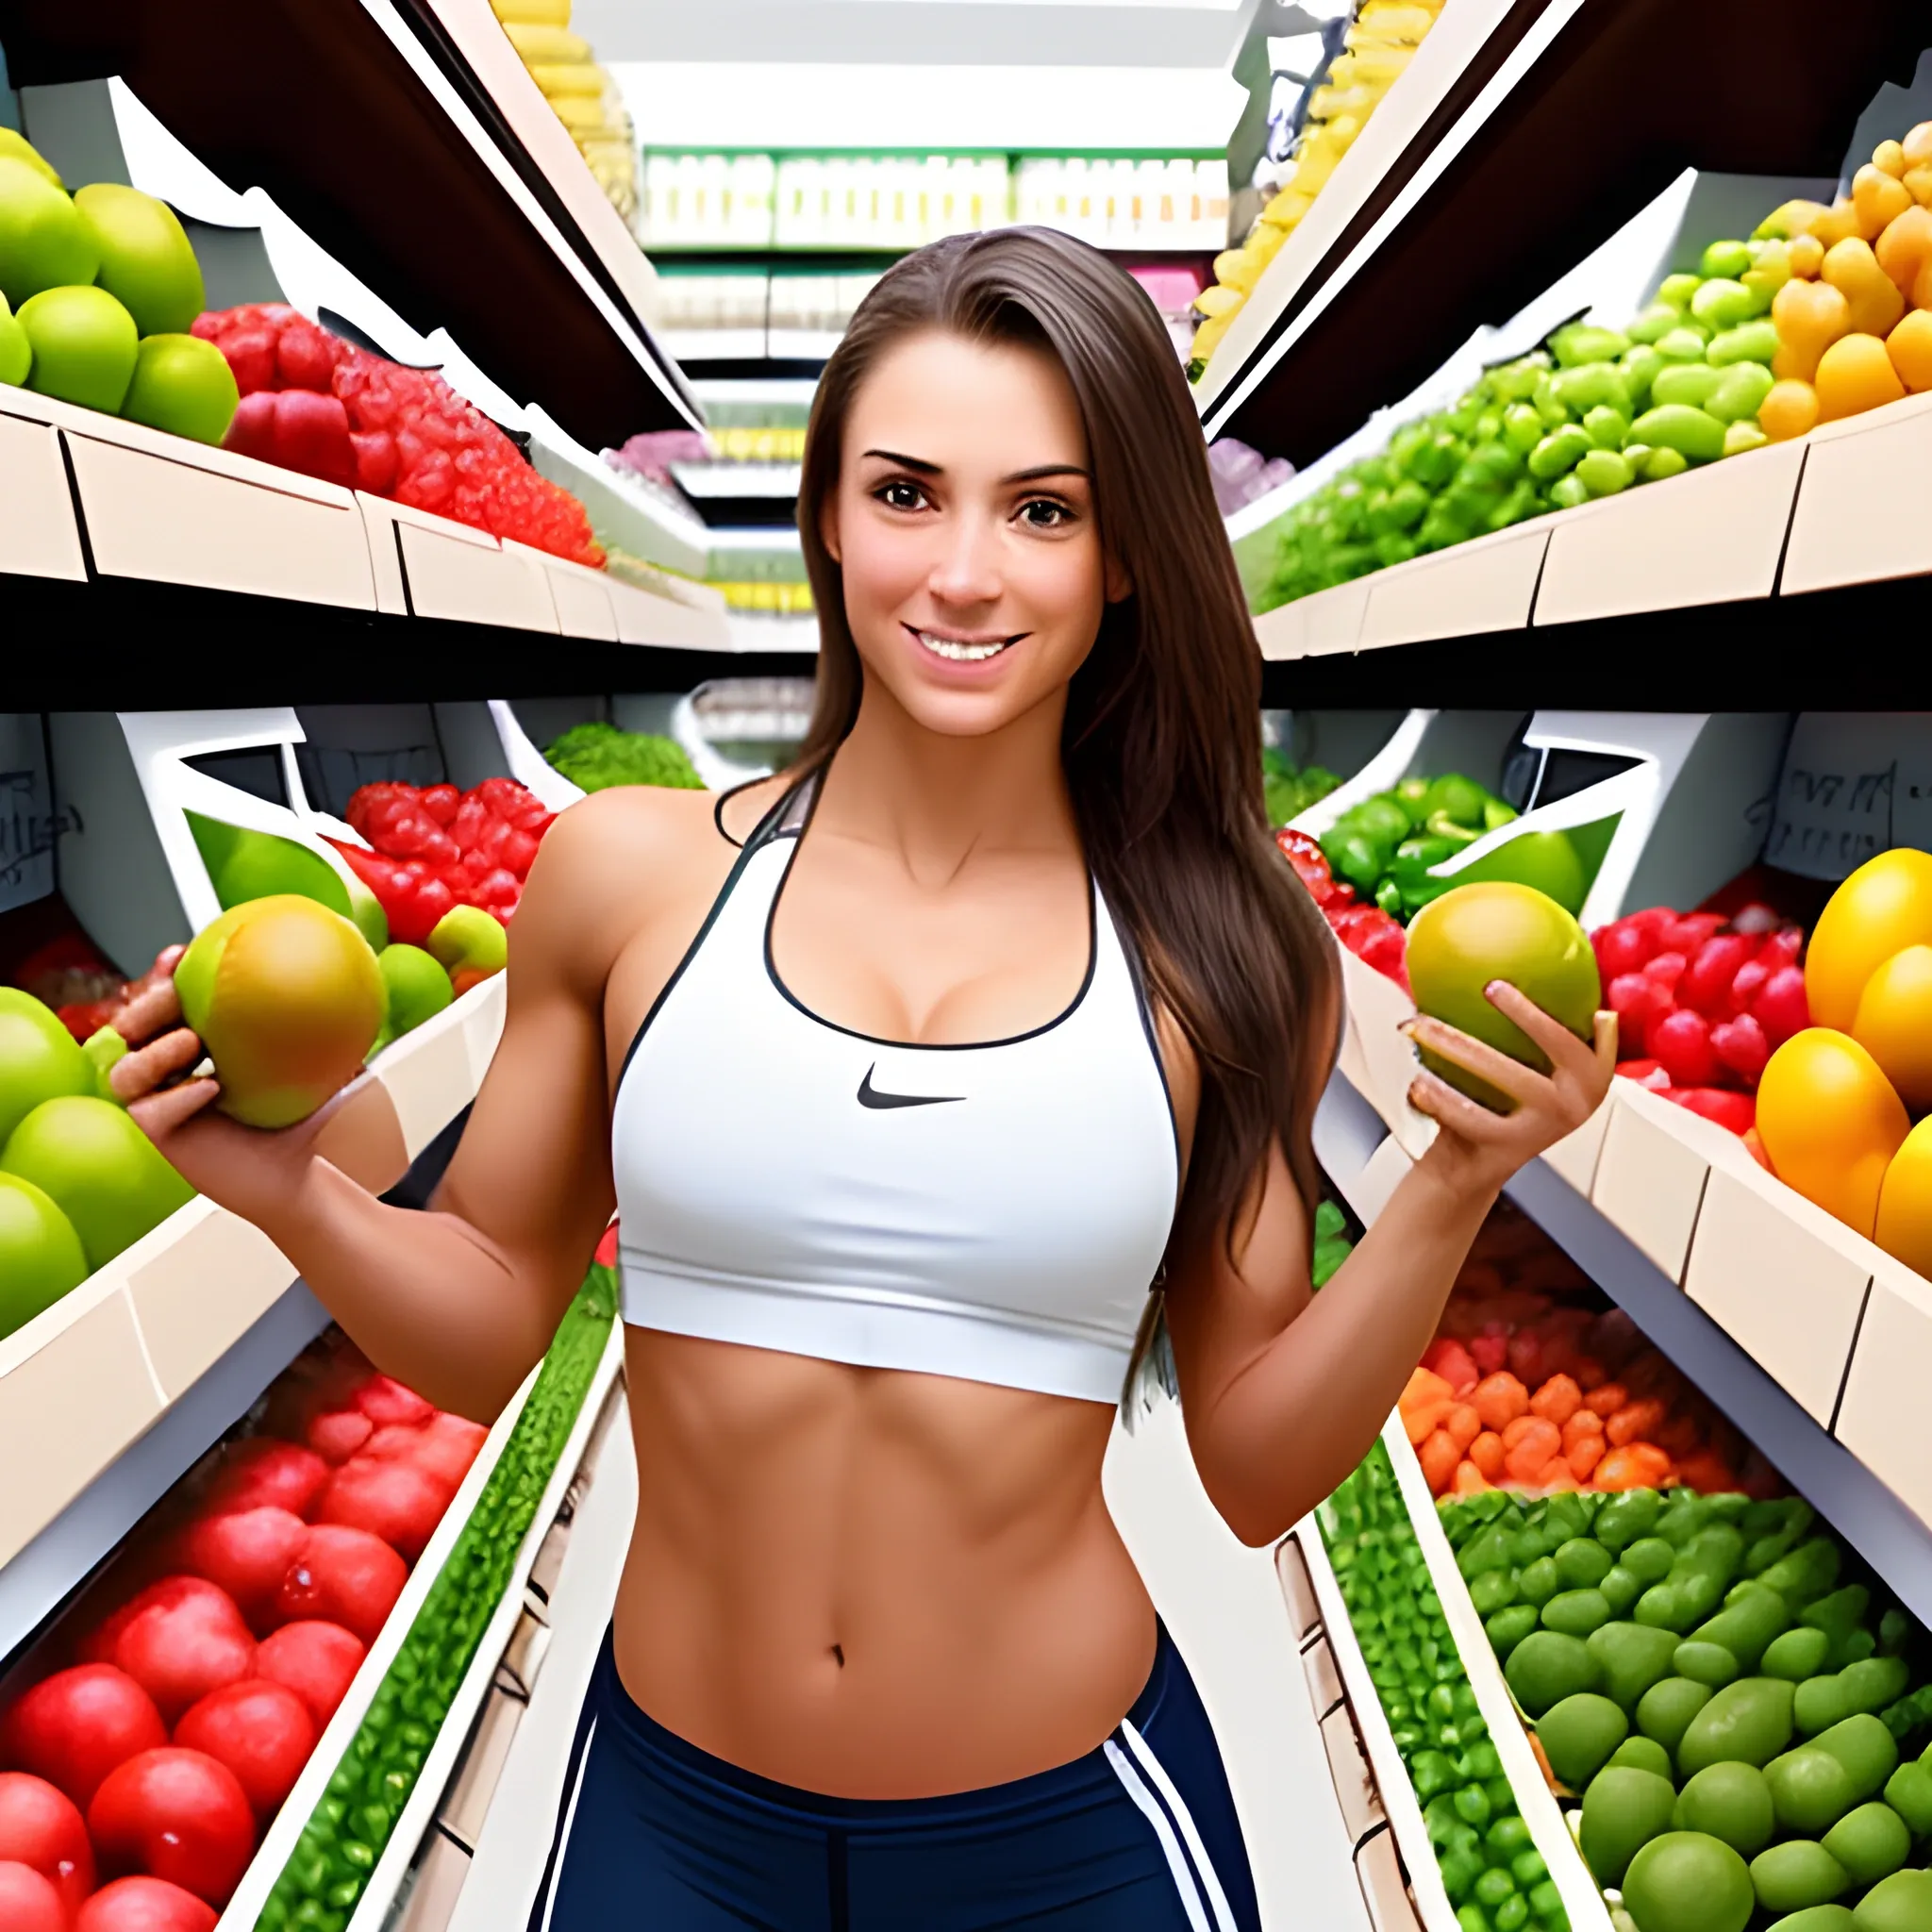 Take as a reference the image I gave you and generate the face of a very attractive and sexy athlete showing her entire body, in a natural products store buying fruit from the shelves.